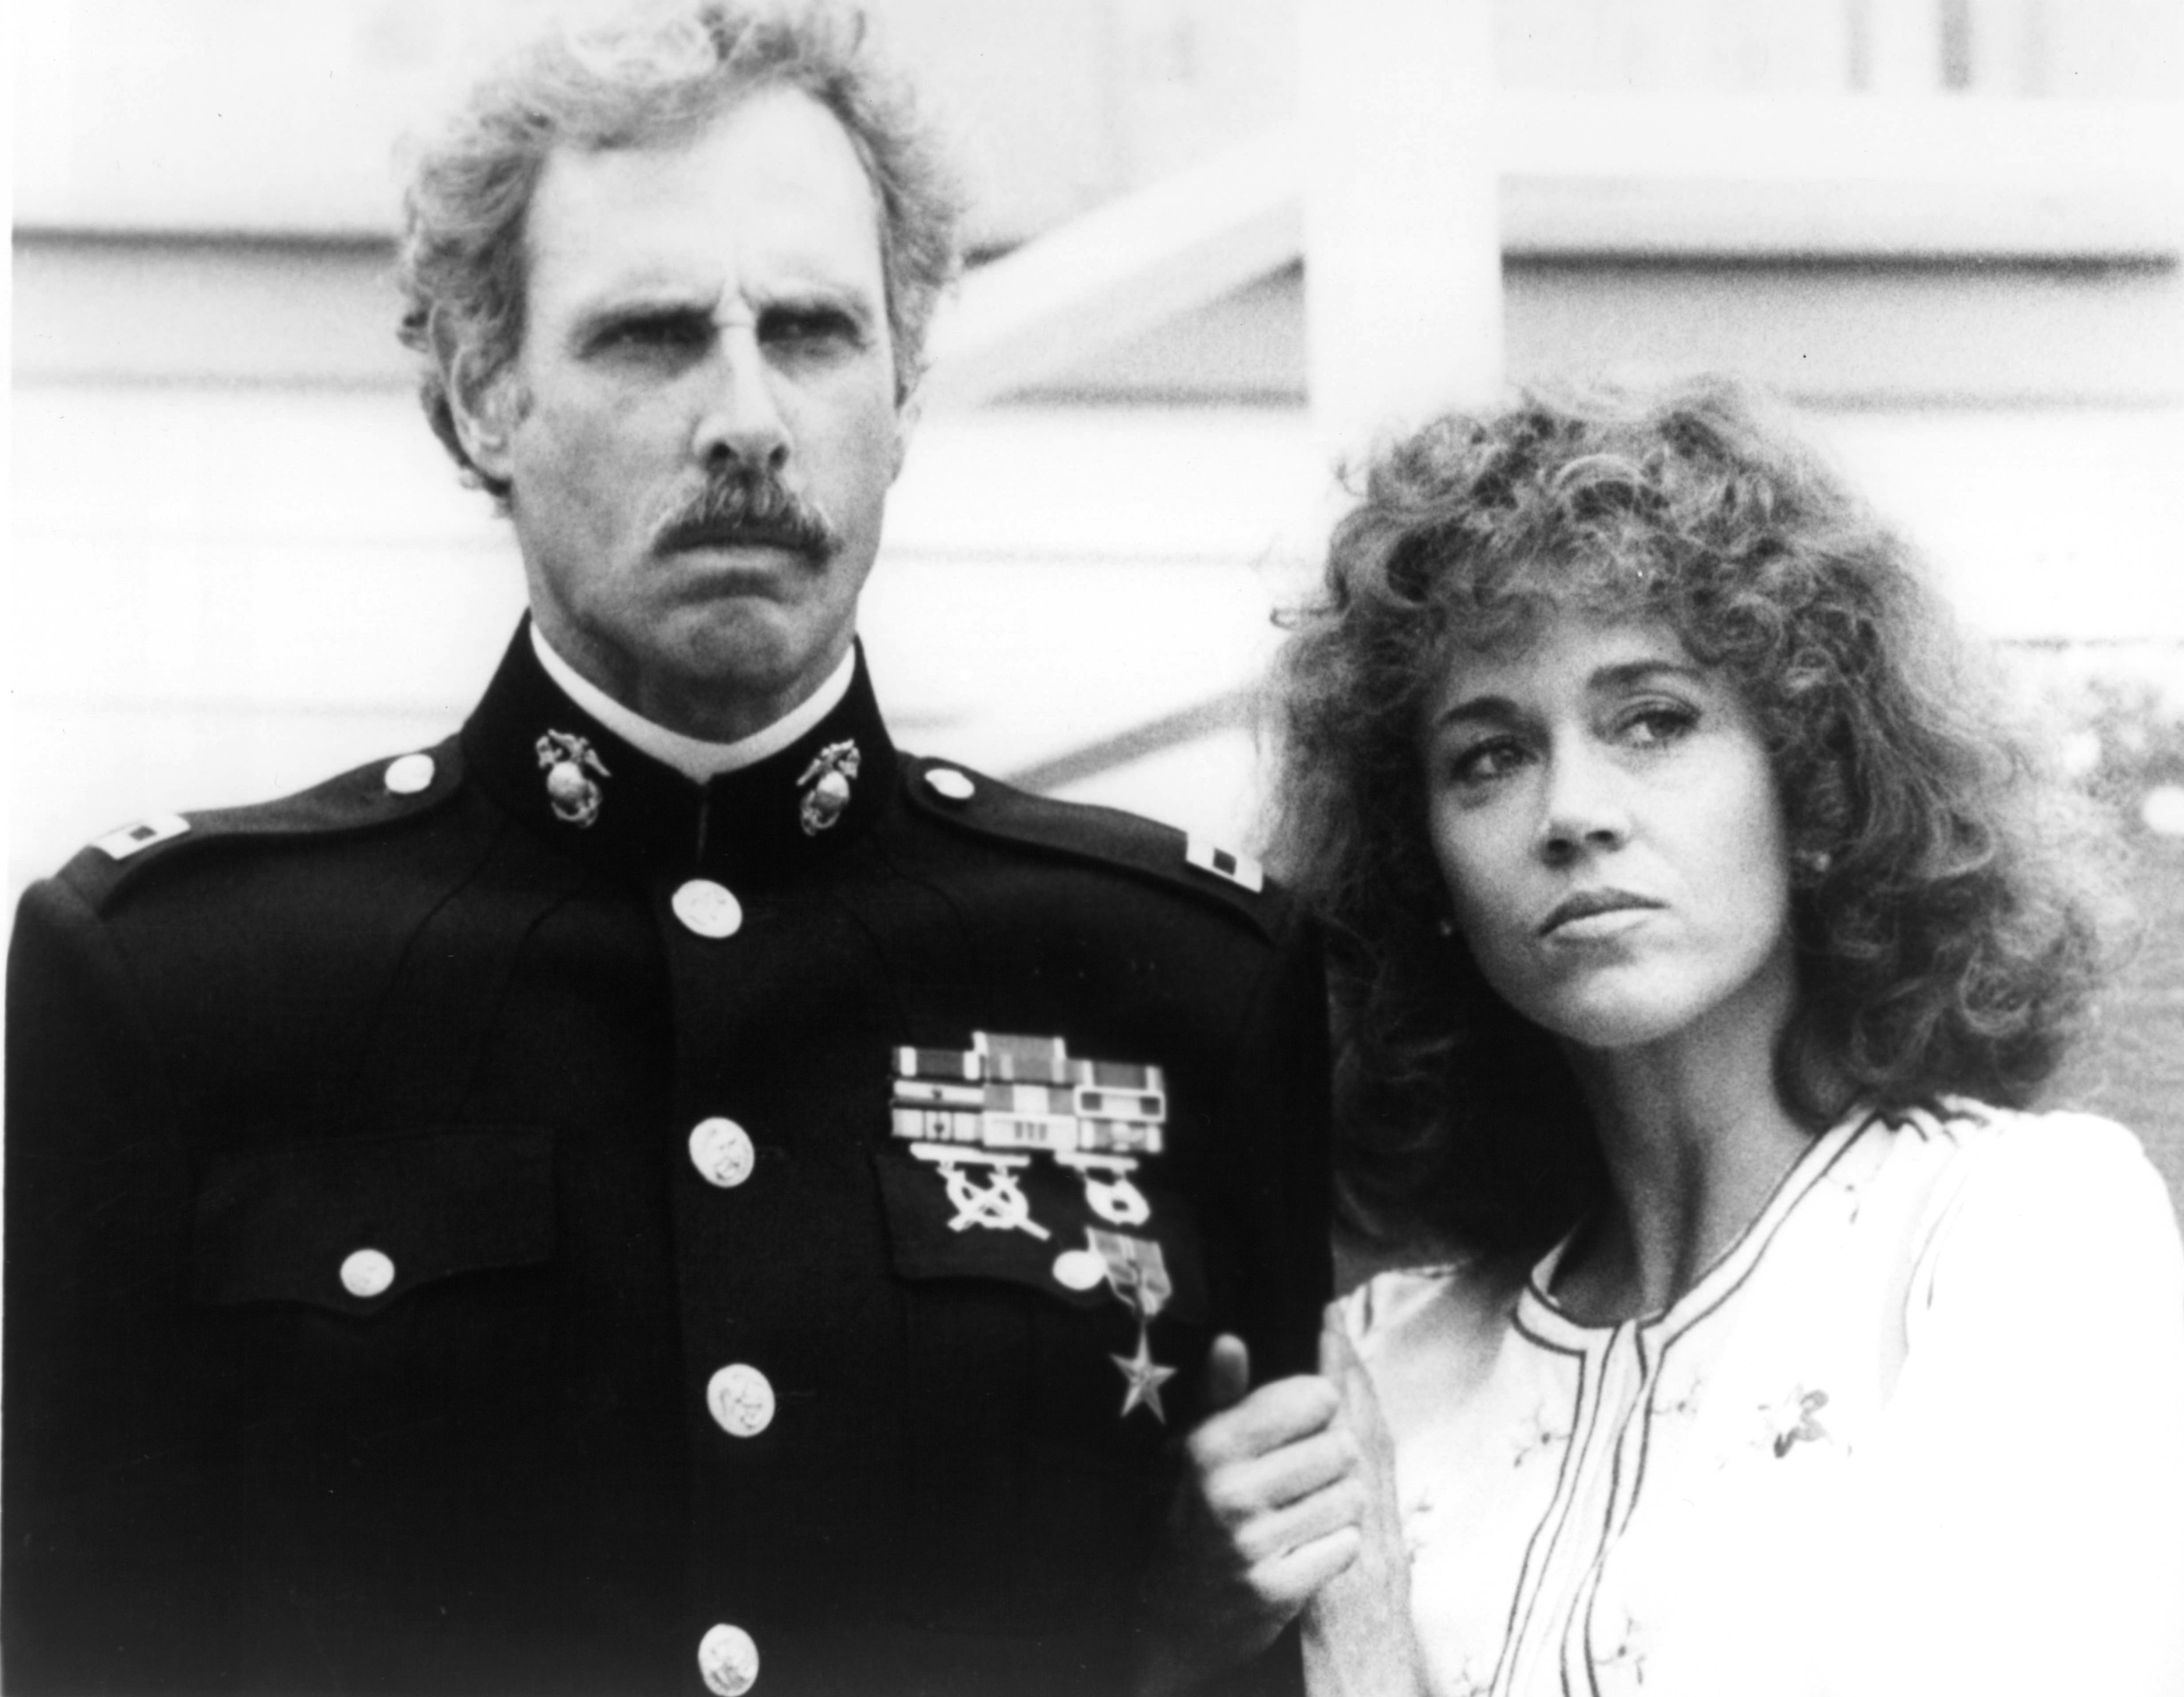 Still of Jane Fonda and Bruce Dern in Coming Home (1978)